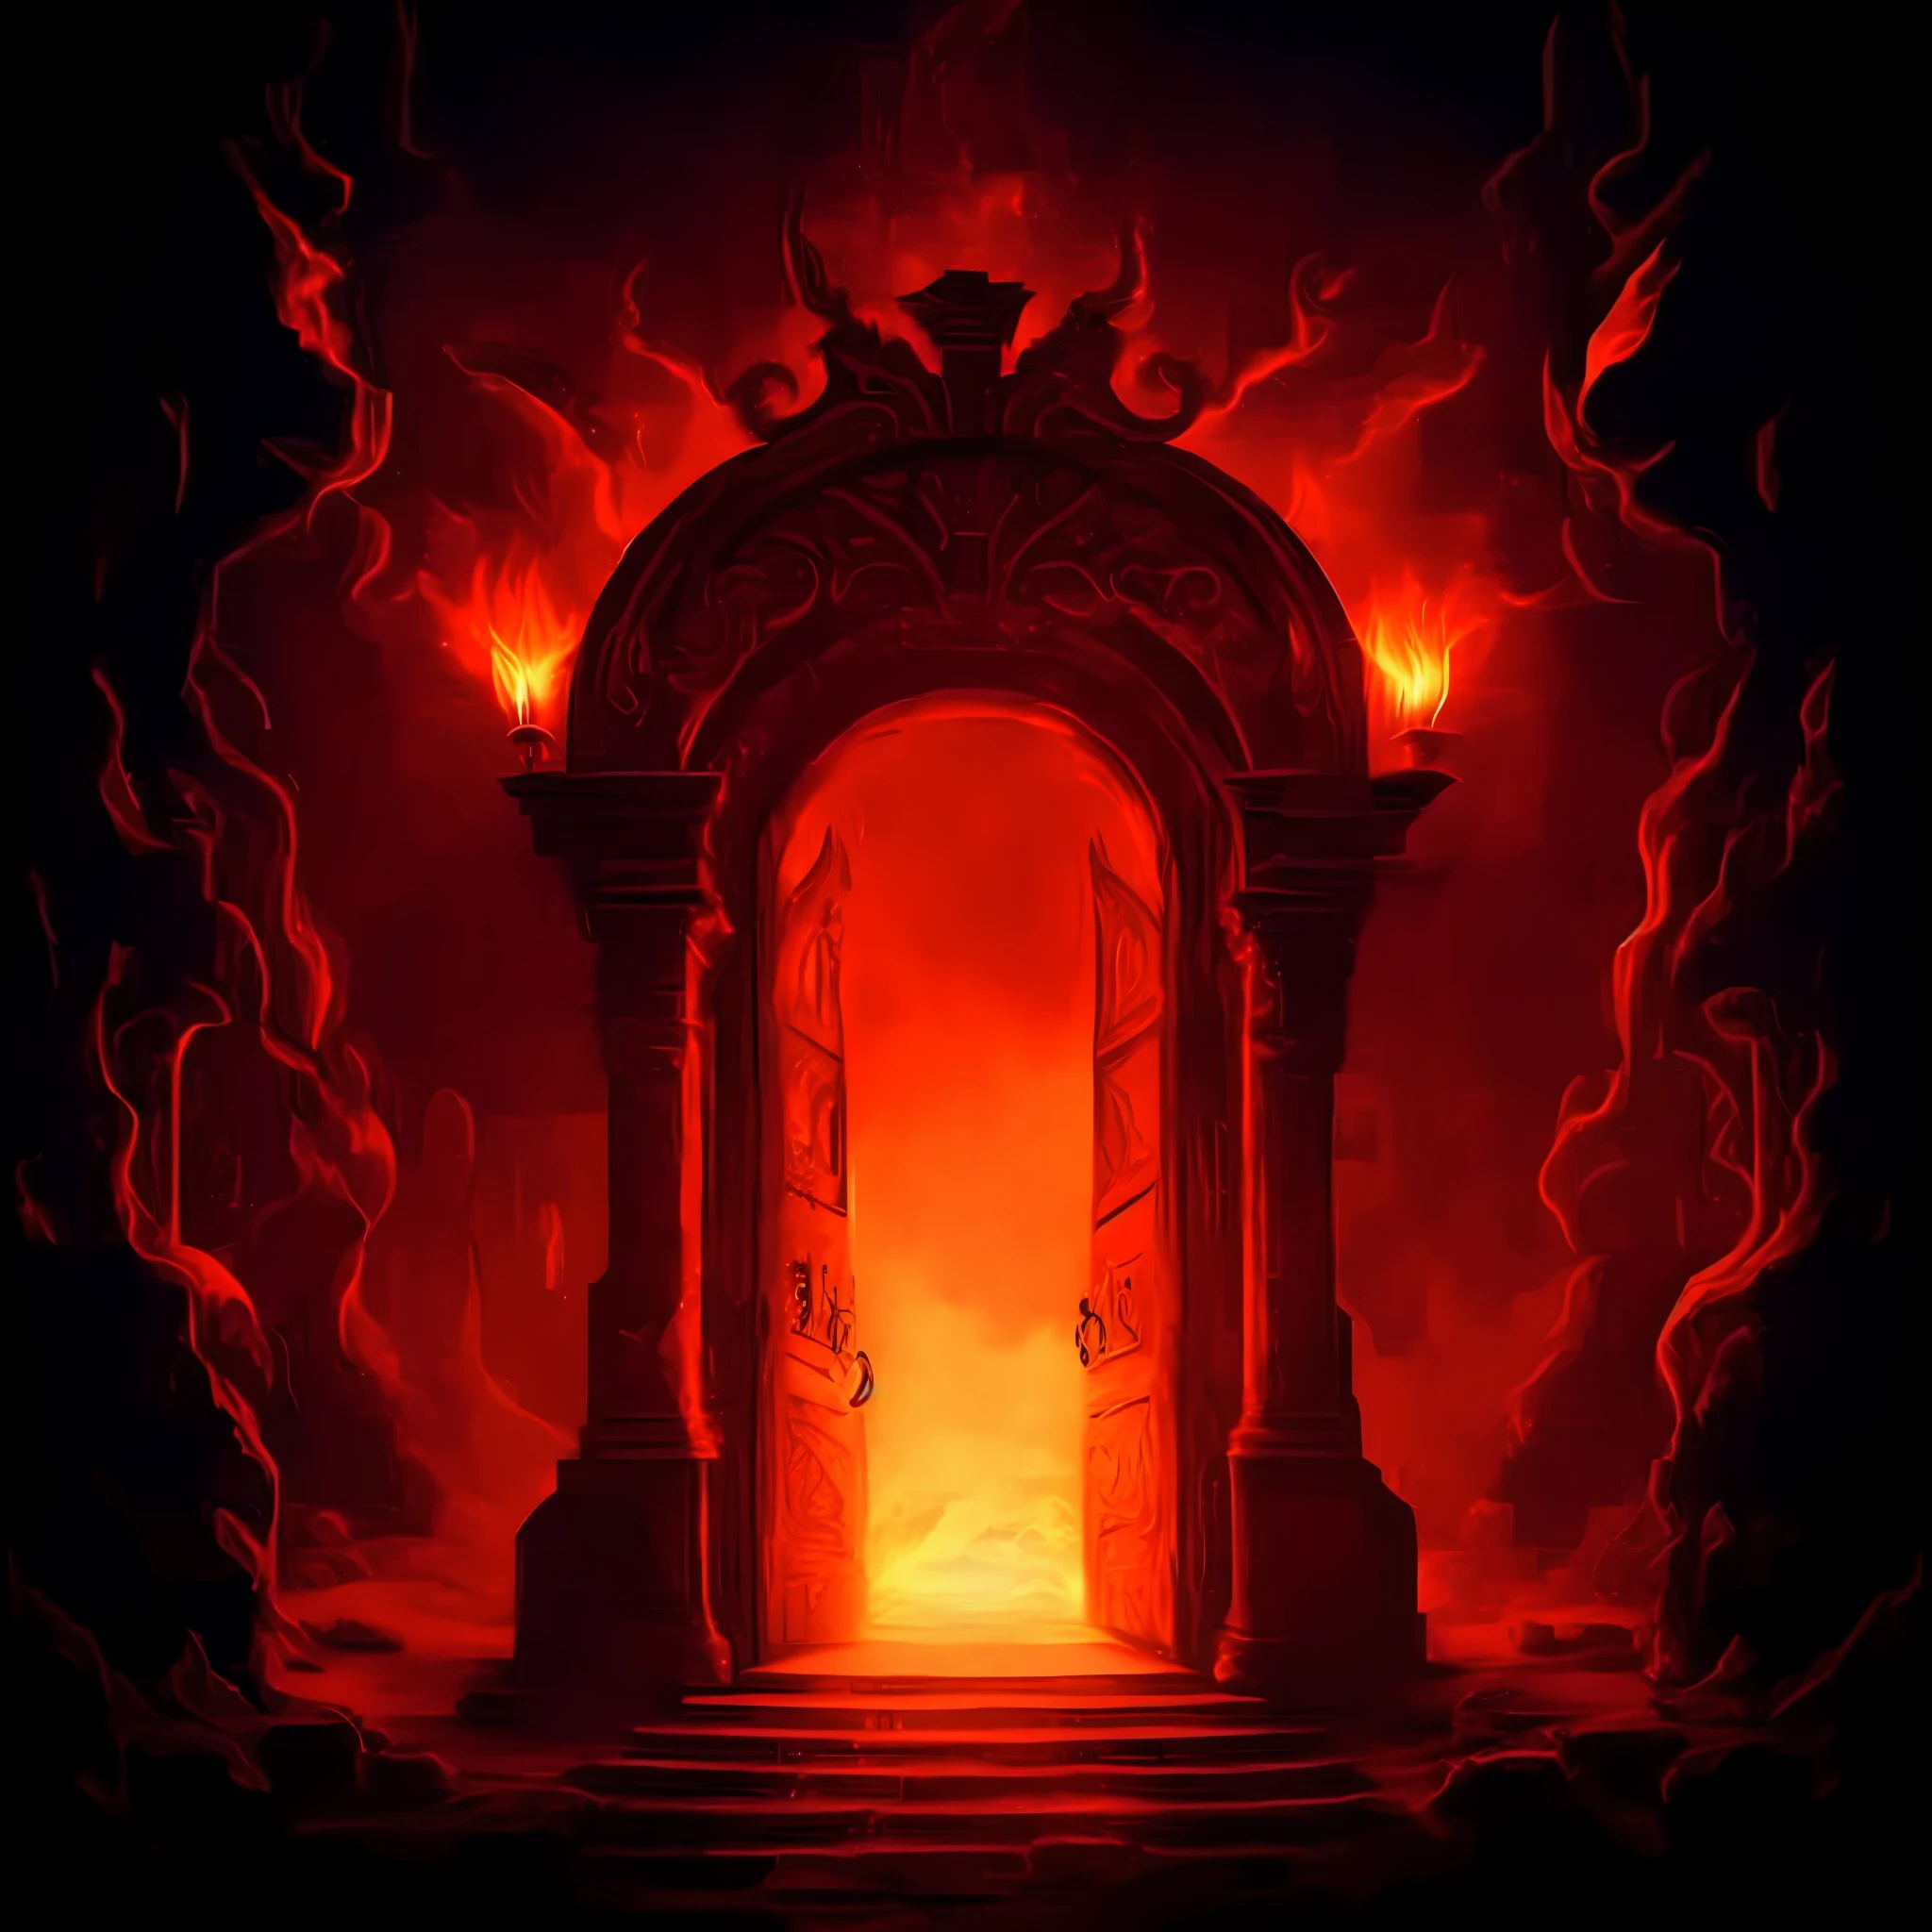 a red fire door in a dark room with a fire coming out, a portal to the lost flame realm, portal to hell, gate to hell, the gate to hell, the gates of hell, gates of hell, the great door of hell, hell background, portal to the ethereal realm, studying a hell open rift portal, a portal to the depths